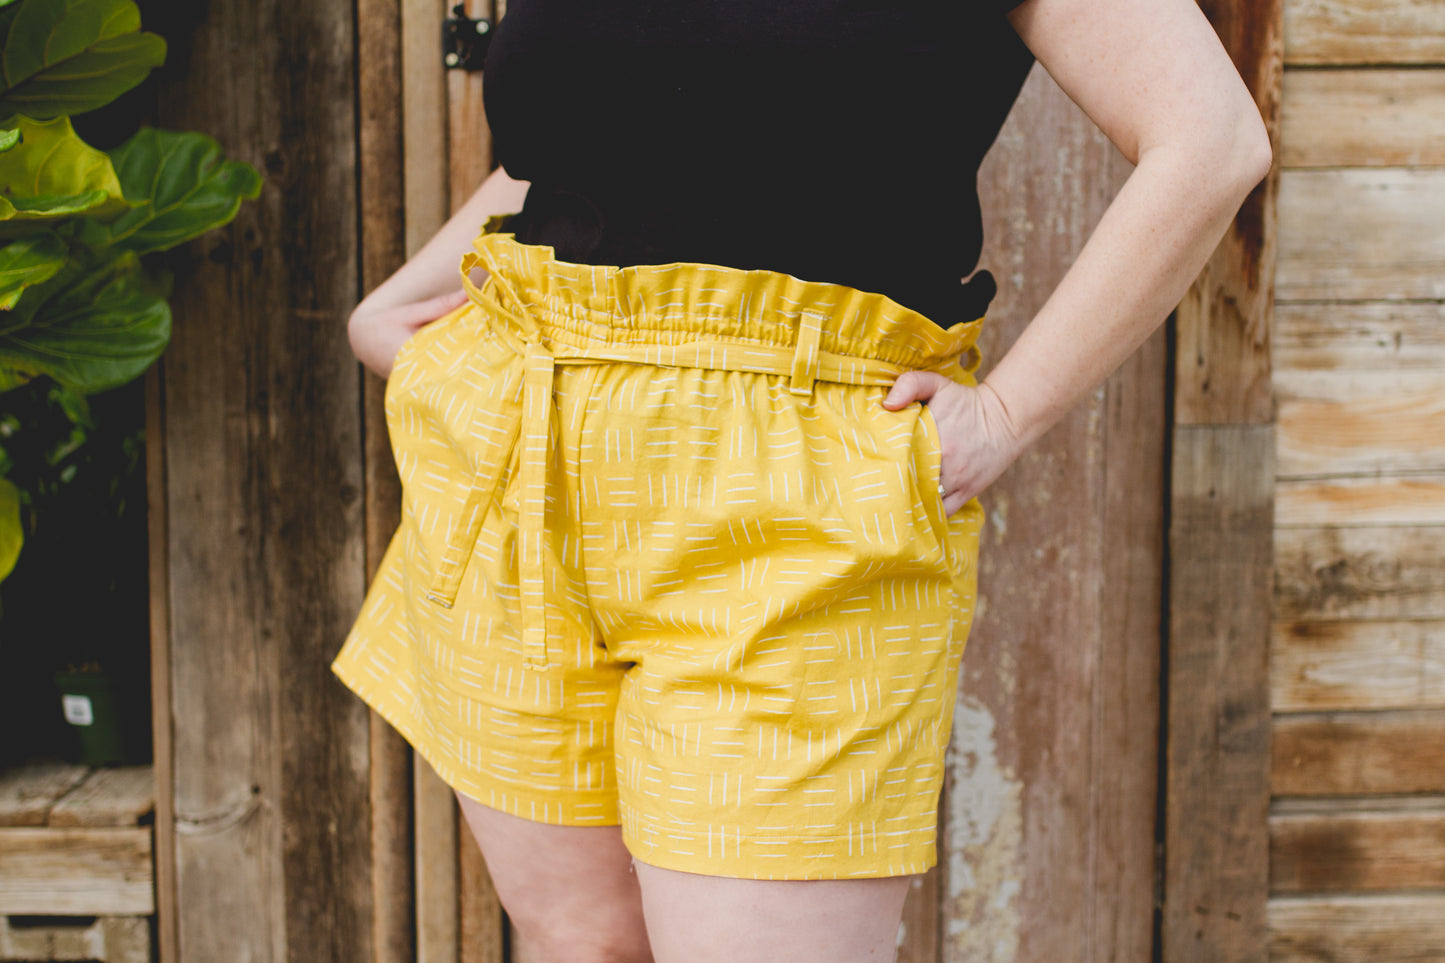 PRE-ORDER Paper Bag Waist Shorts - Choose Your Fabric